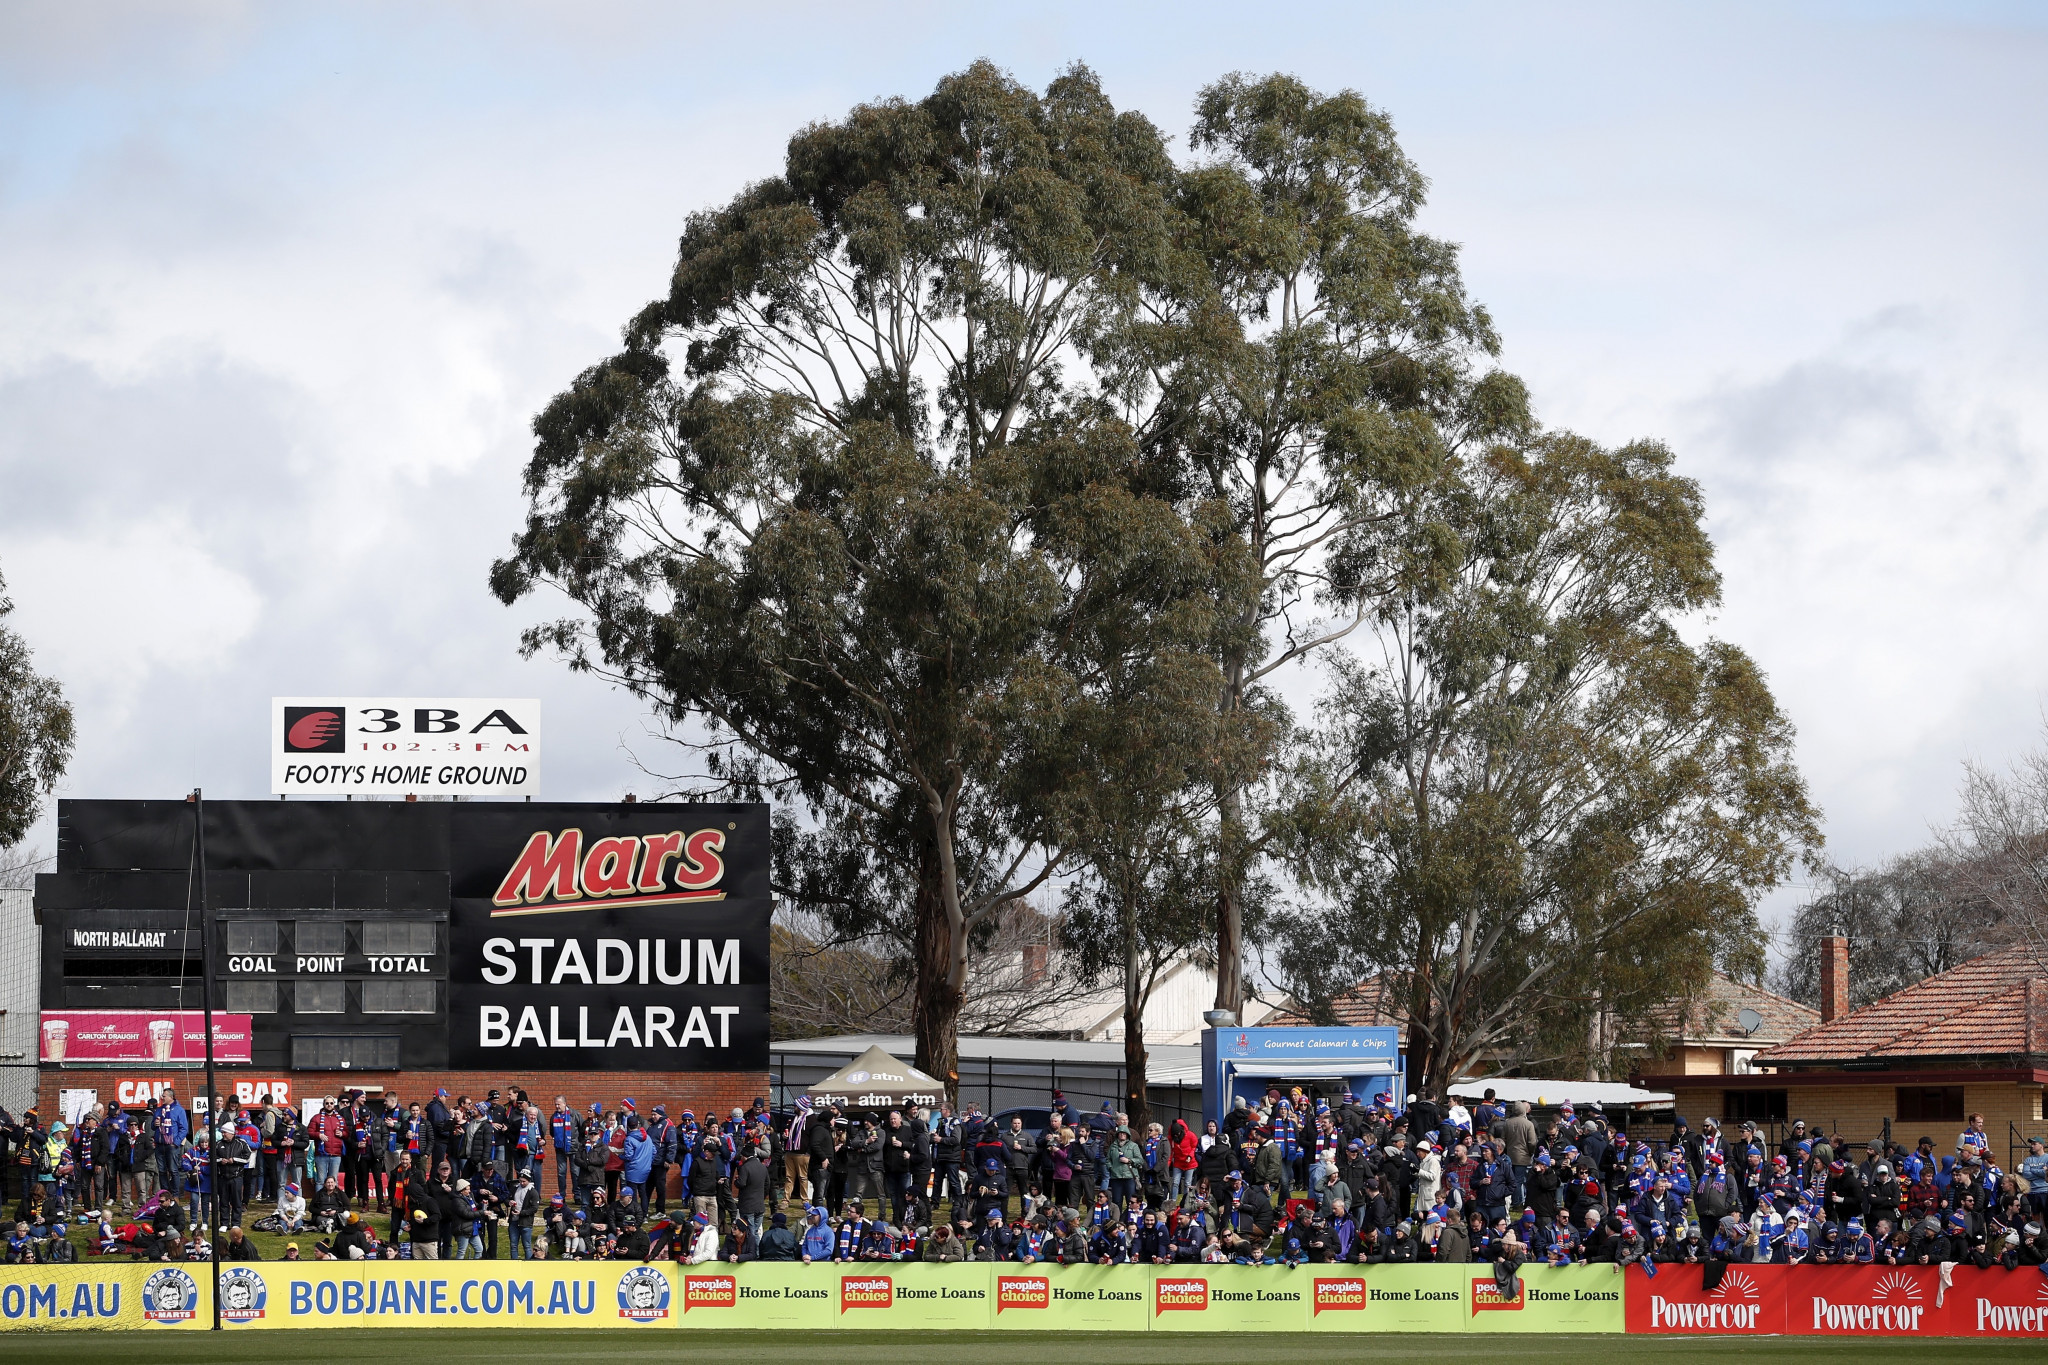 Calls for 300 new homes to be built in Ballarat as legacy for Victoria 2026